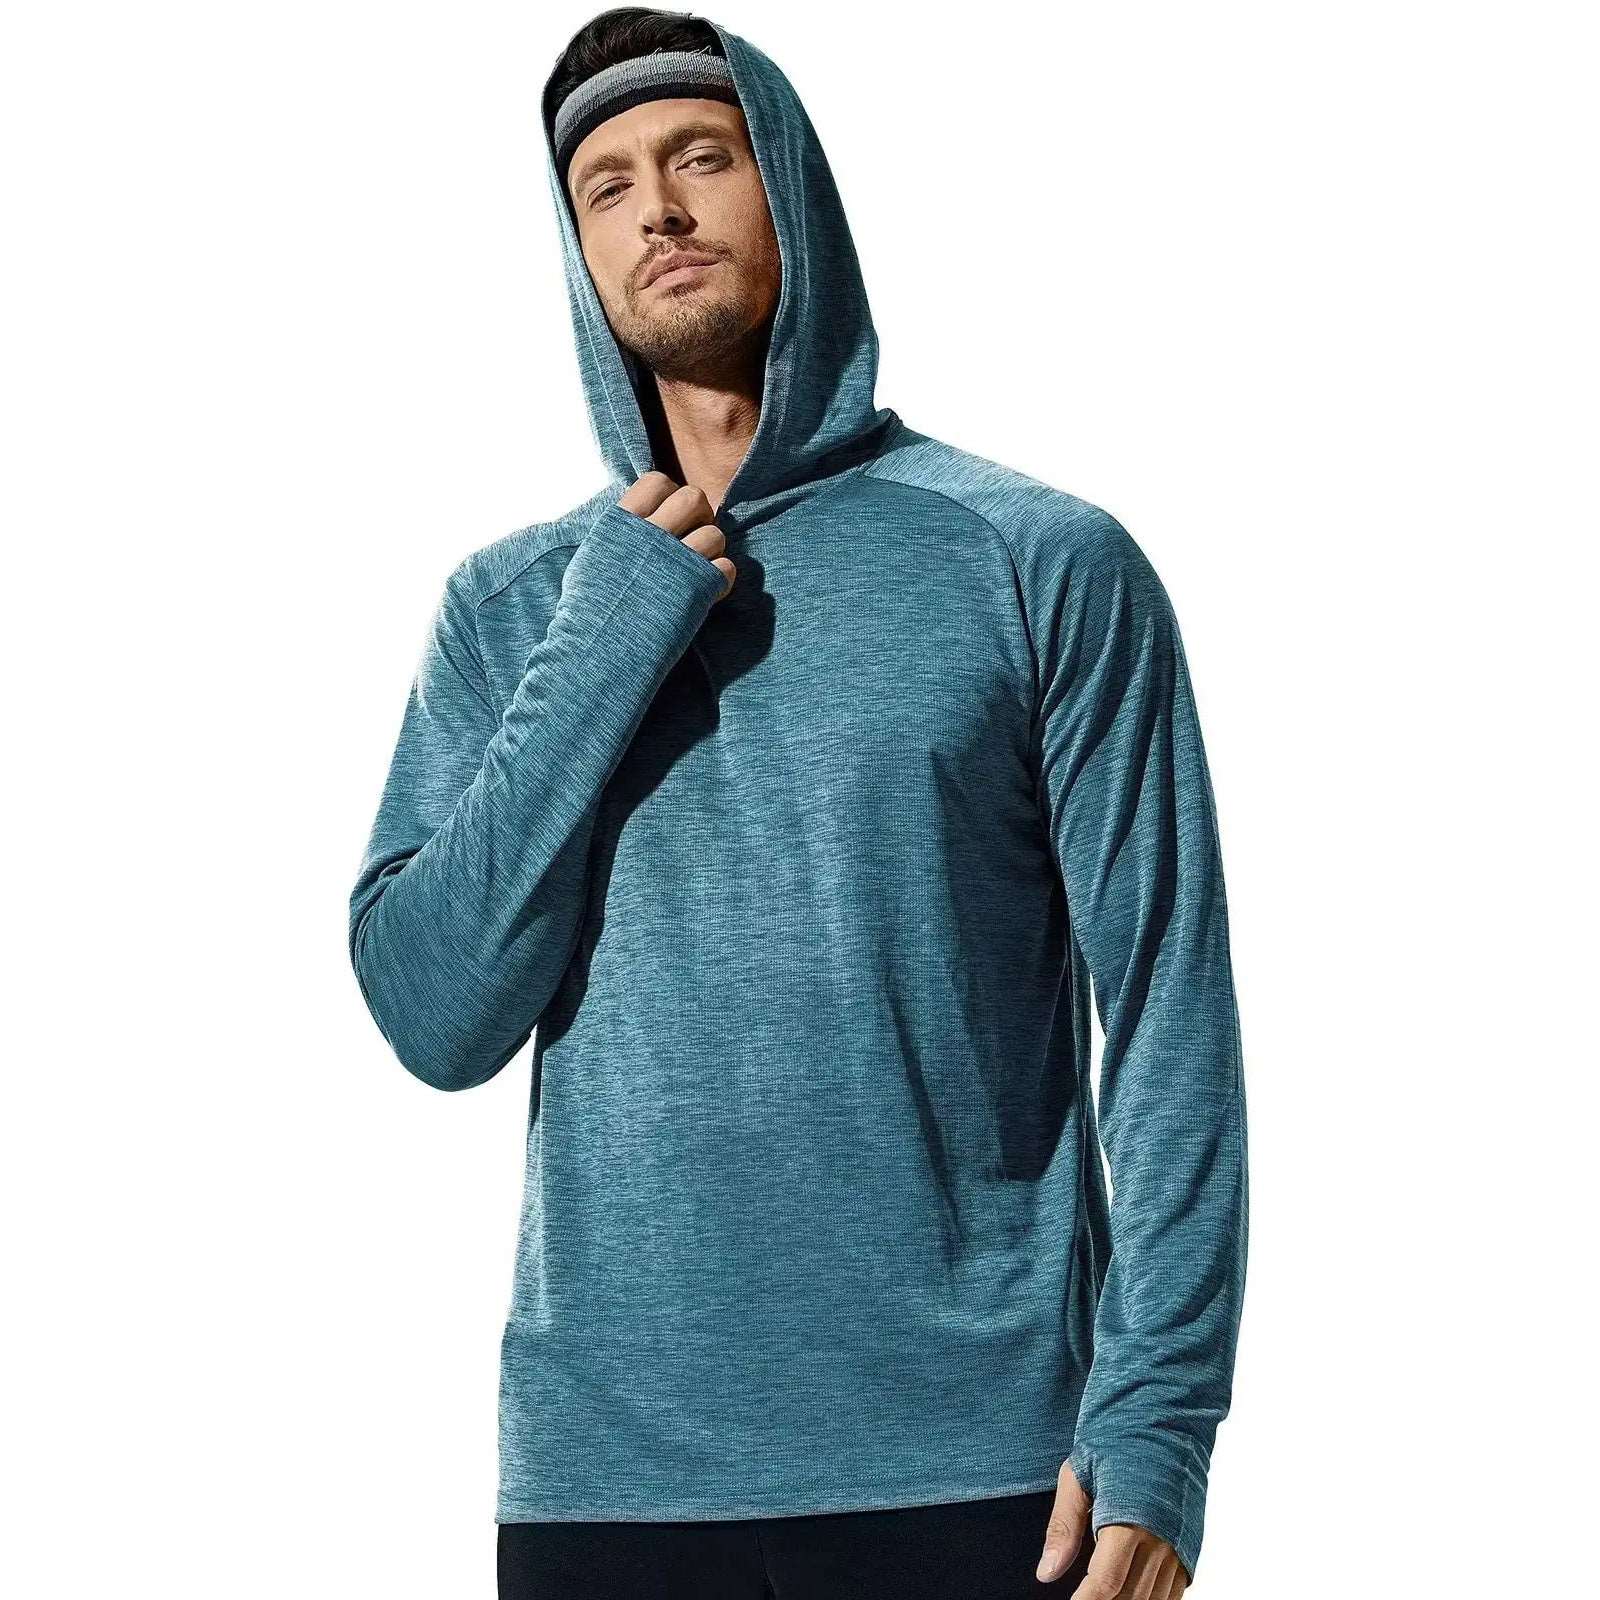 Men's UPF 50+ Sun Protection Hoodie Shirt with Thumbholes - Blue / S